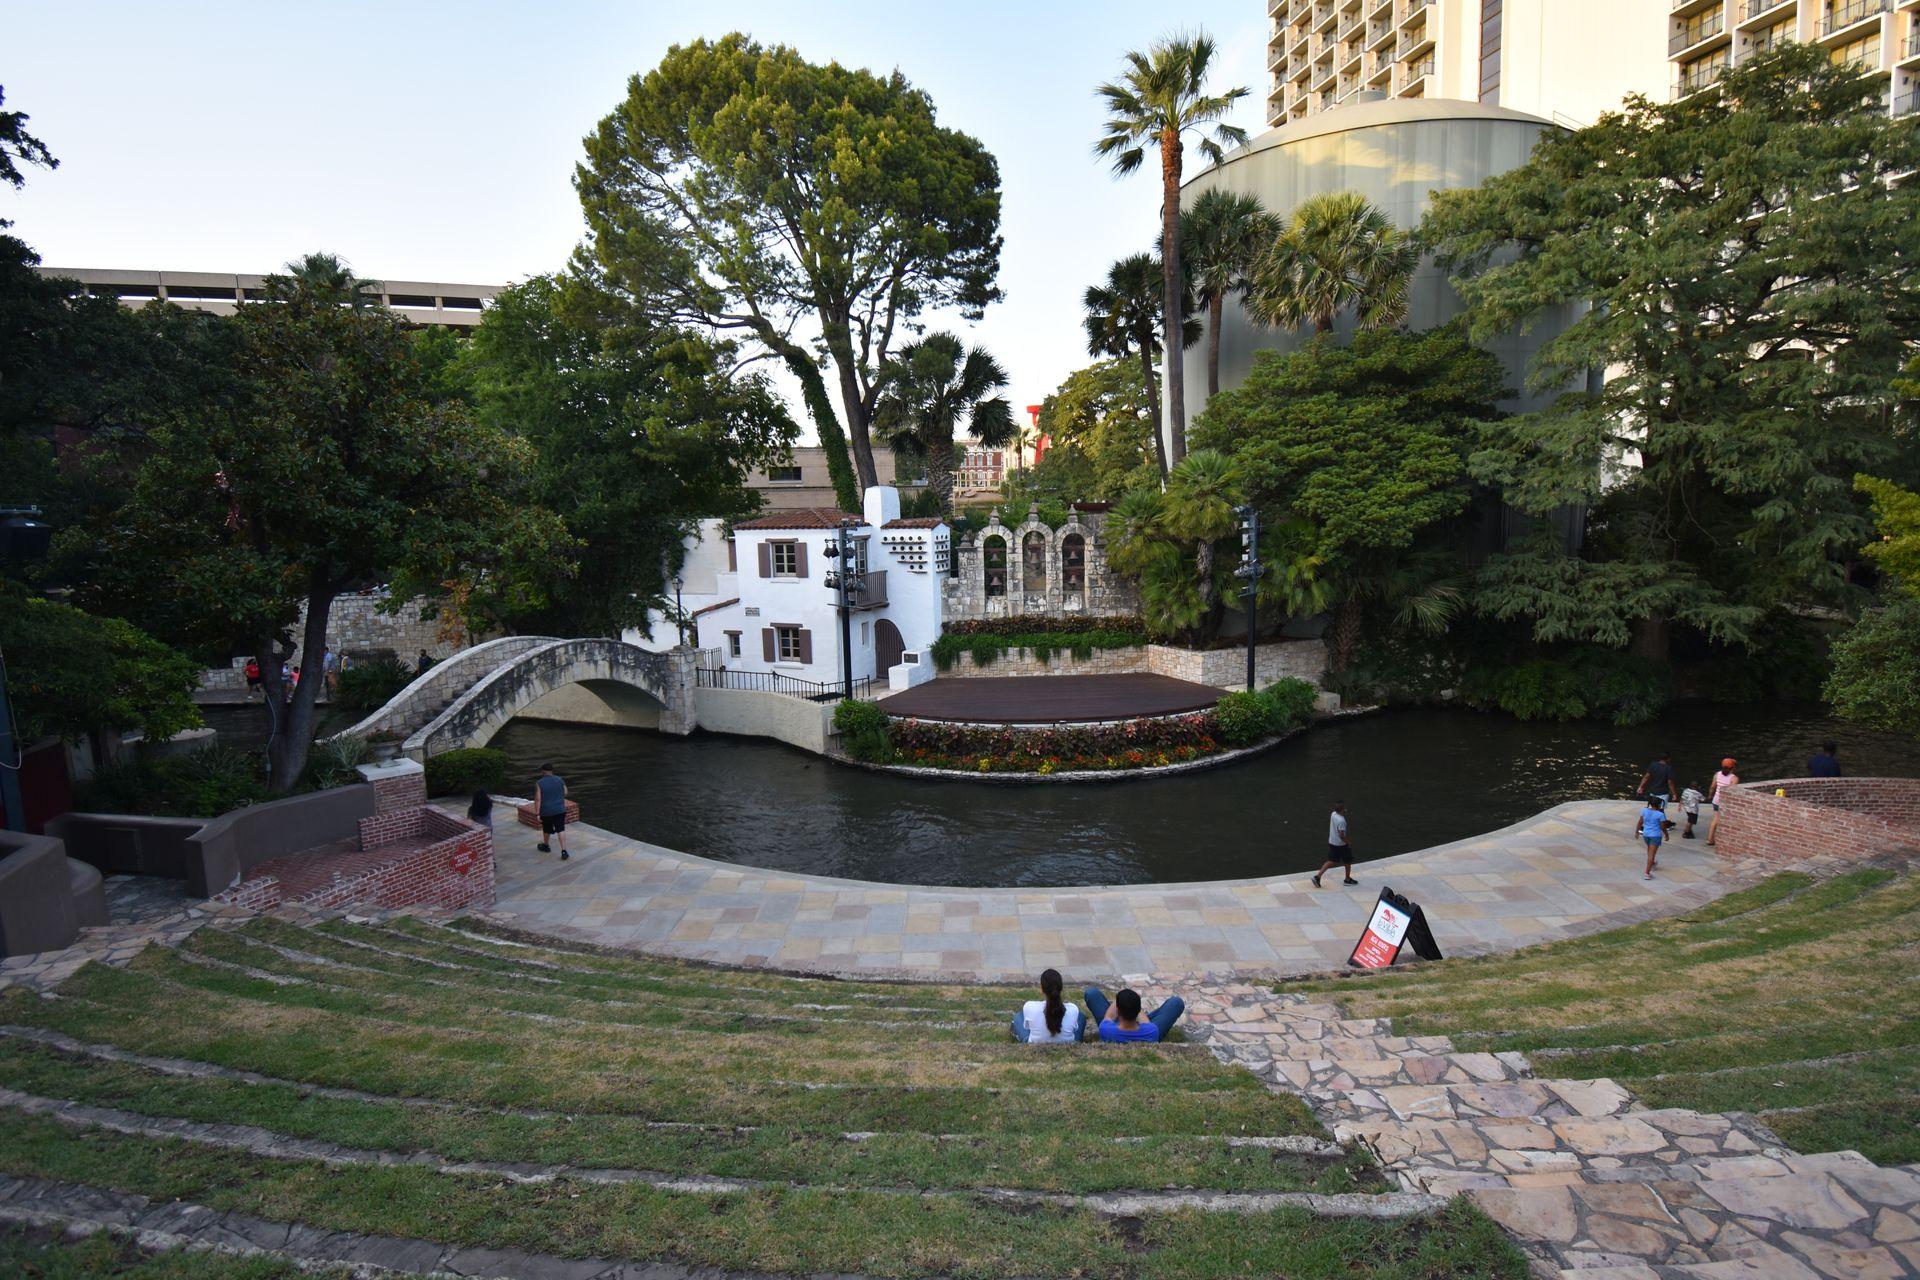 An amphitheater area along the San Antonio Riverwalk. There is a small bridge over the water and a white building across the river.